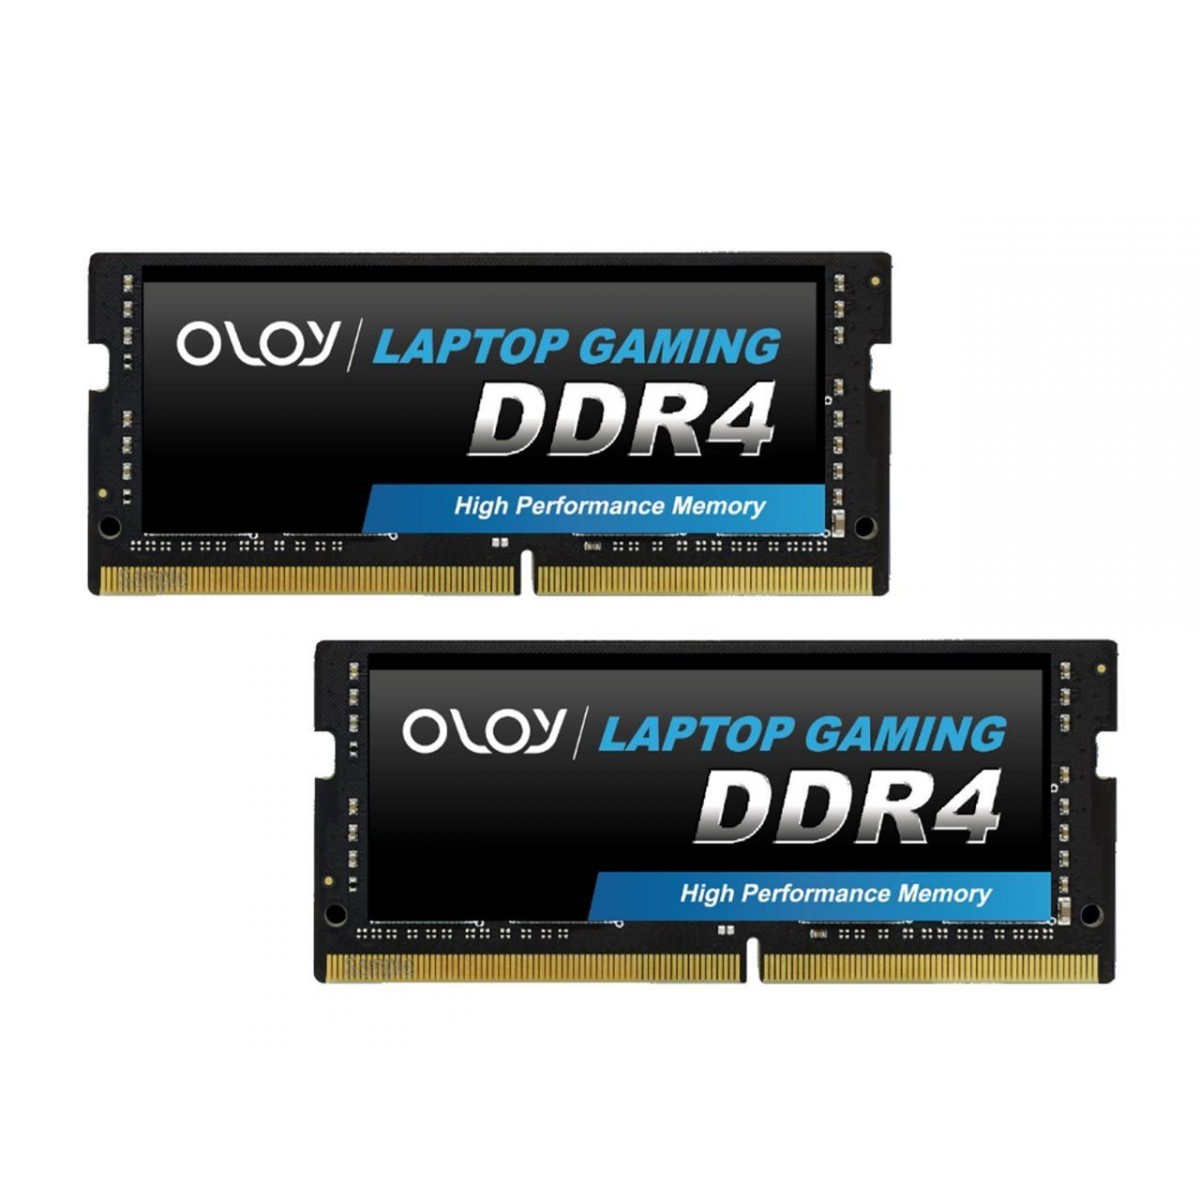 Memória Notebook DDR4 Oloy Laptop Gaming, 64GB (2x32GB), 2666MHZ, MD4S322619MZDC